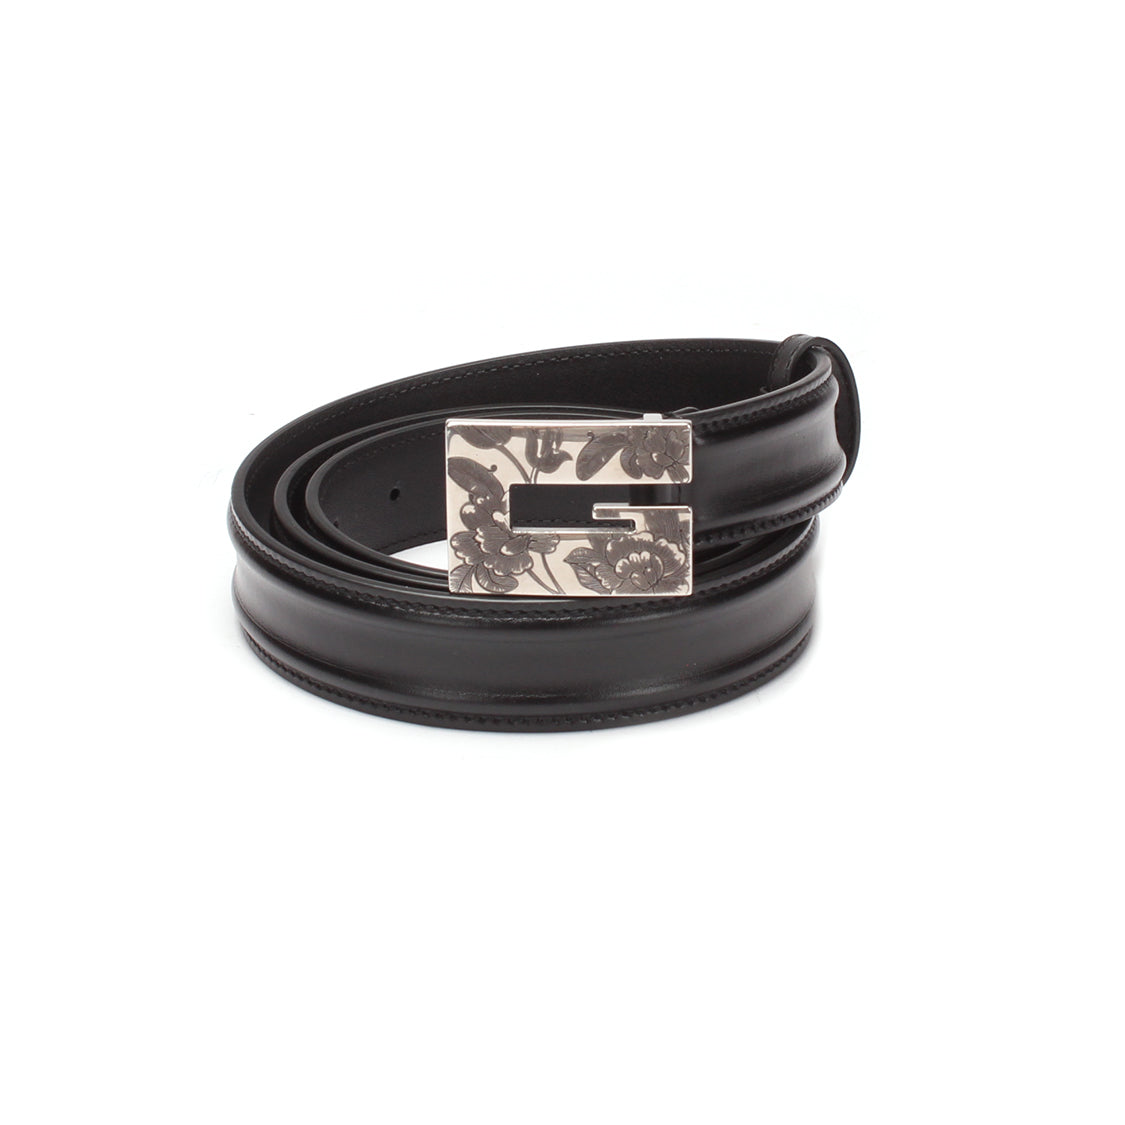 Leather G Buckle Belt